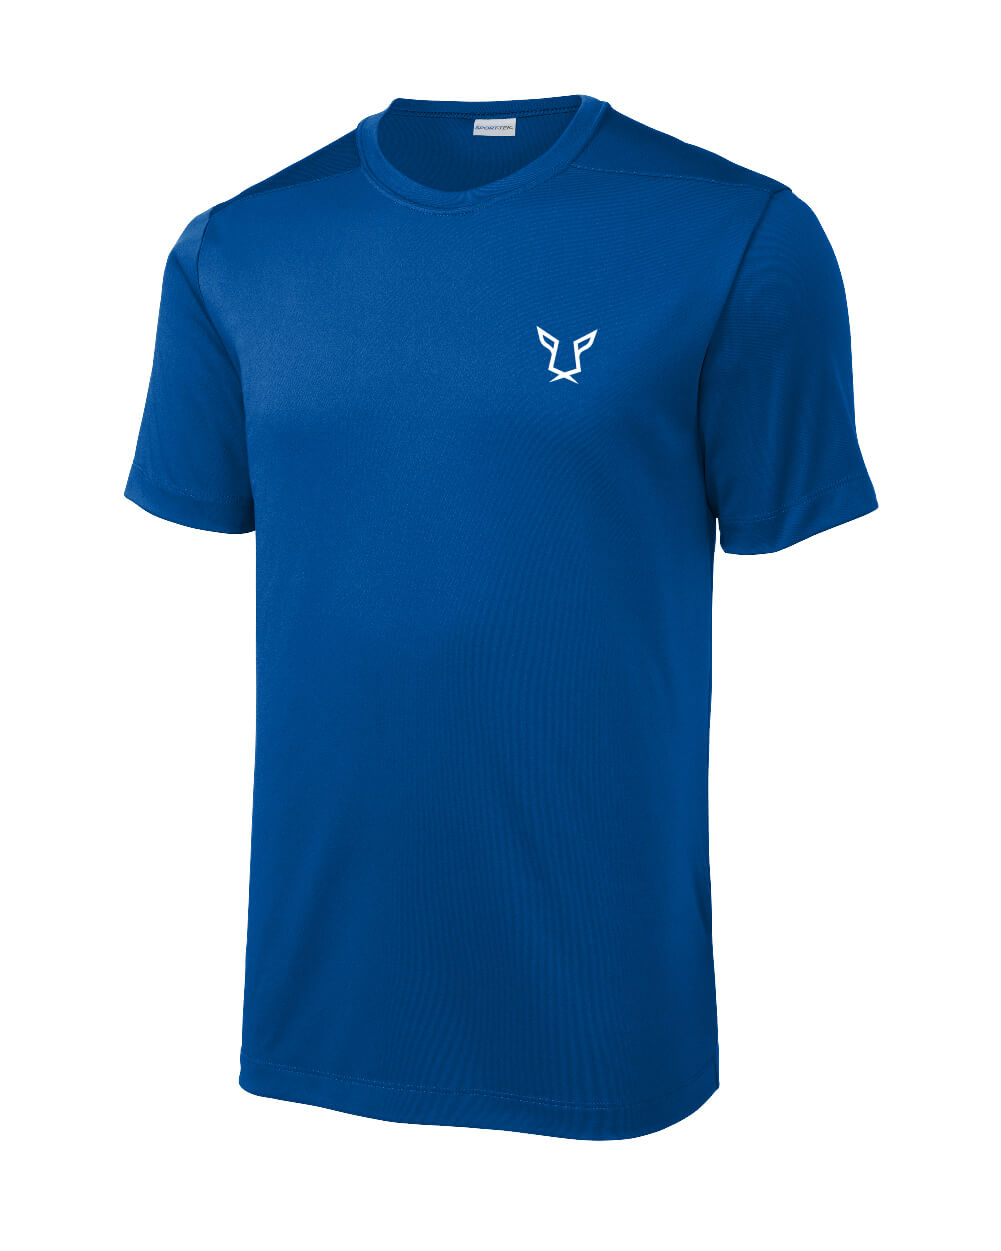 Men's Royal Evolution Performance Tee by Odisi Apparel